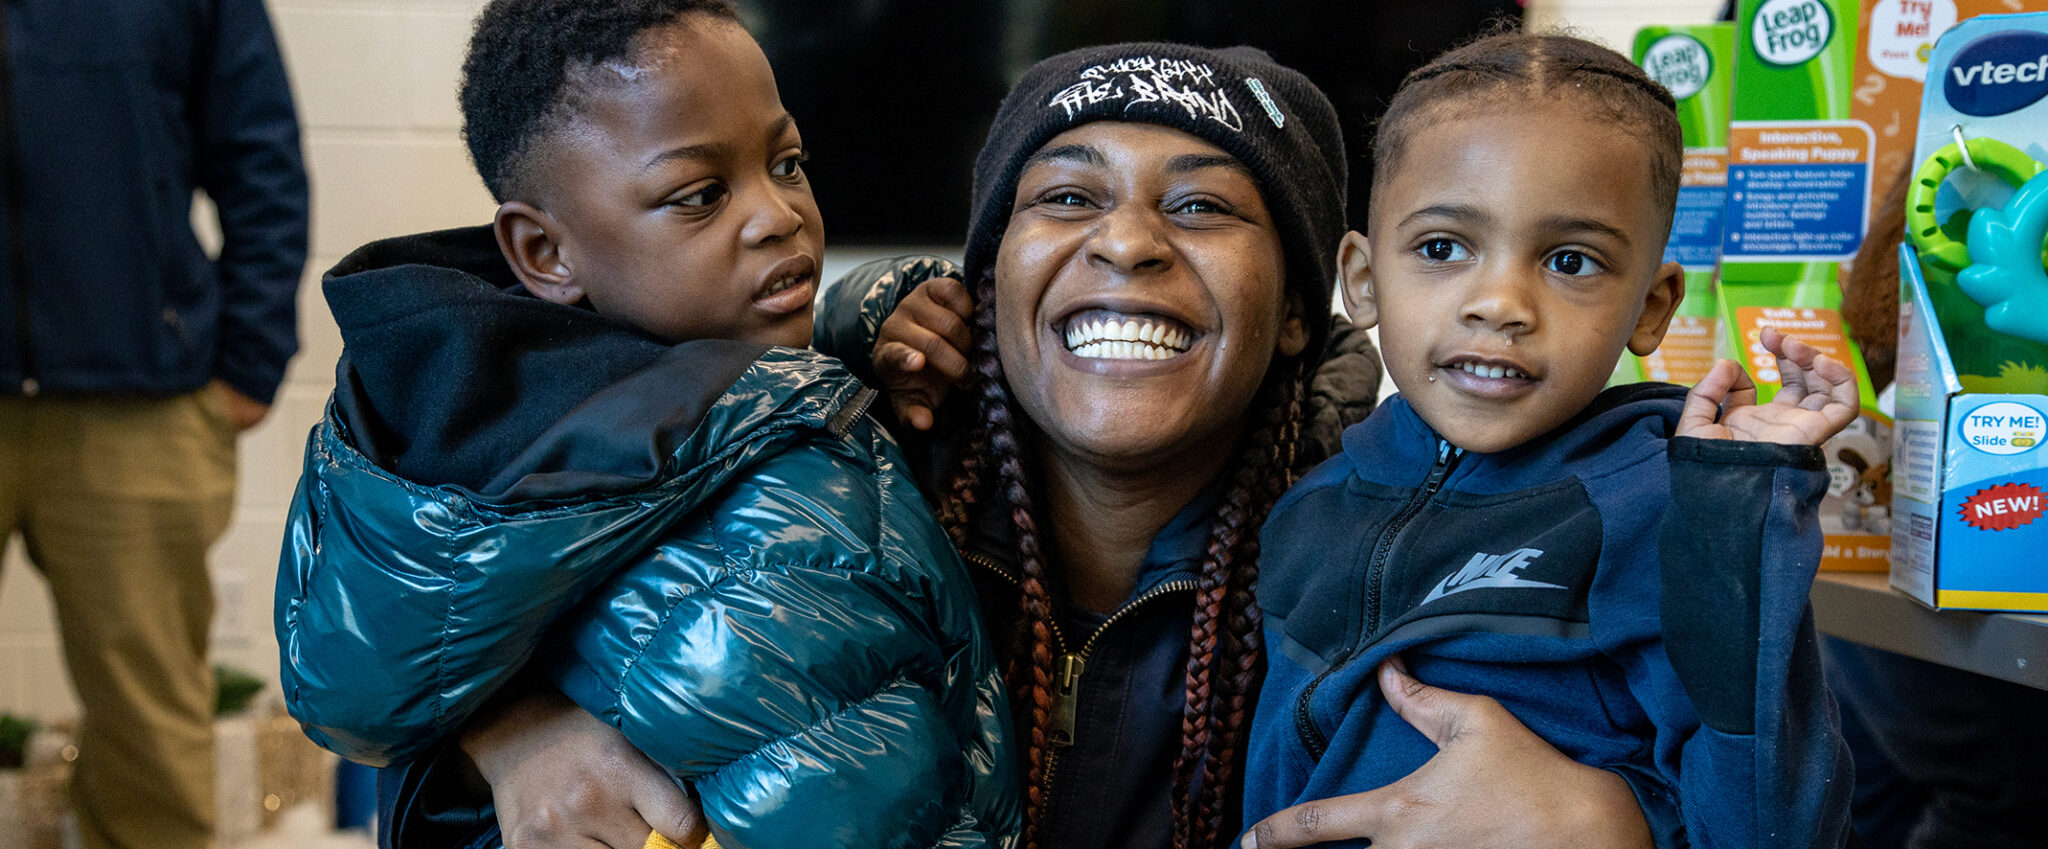 Woman at Life Deeds event smiling holding two toddlers